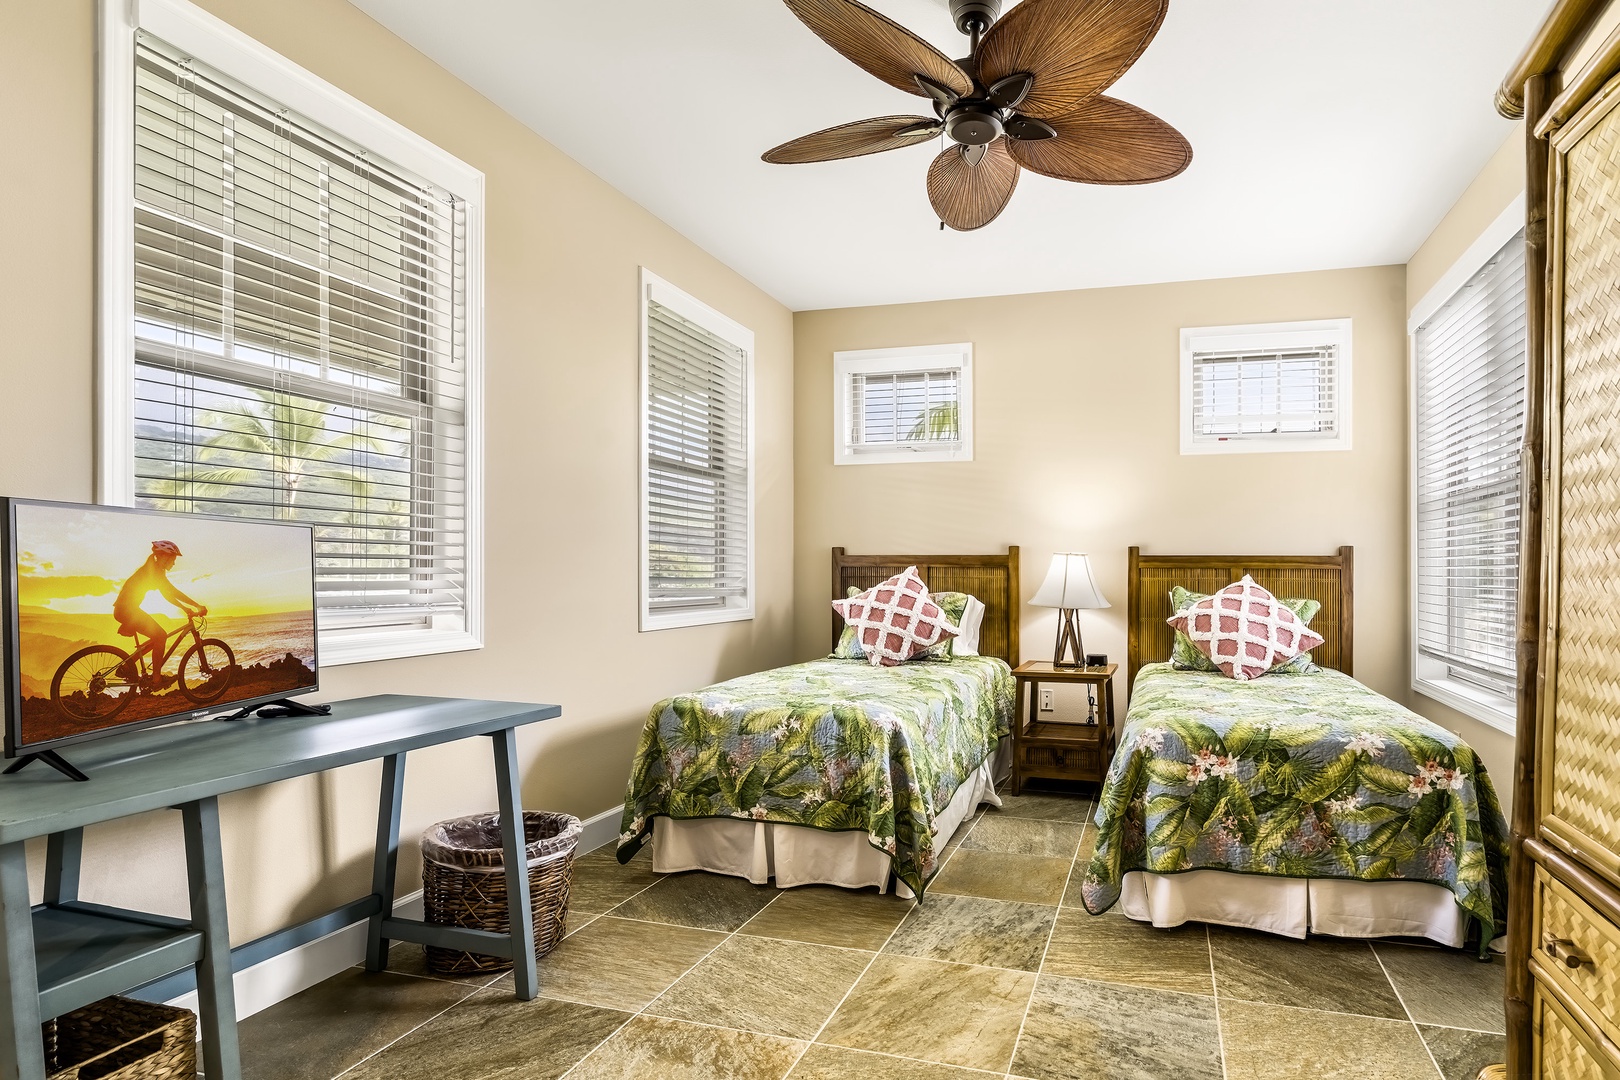 Kailua Kona Vacation Rentals, Green/Blue Combo - Downstairs bonus room equipped with 2 Twin beds